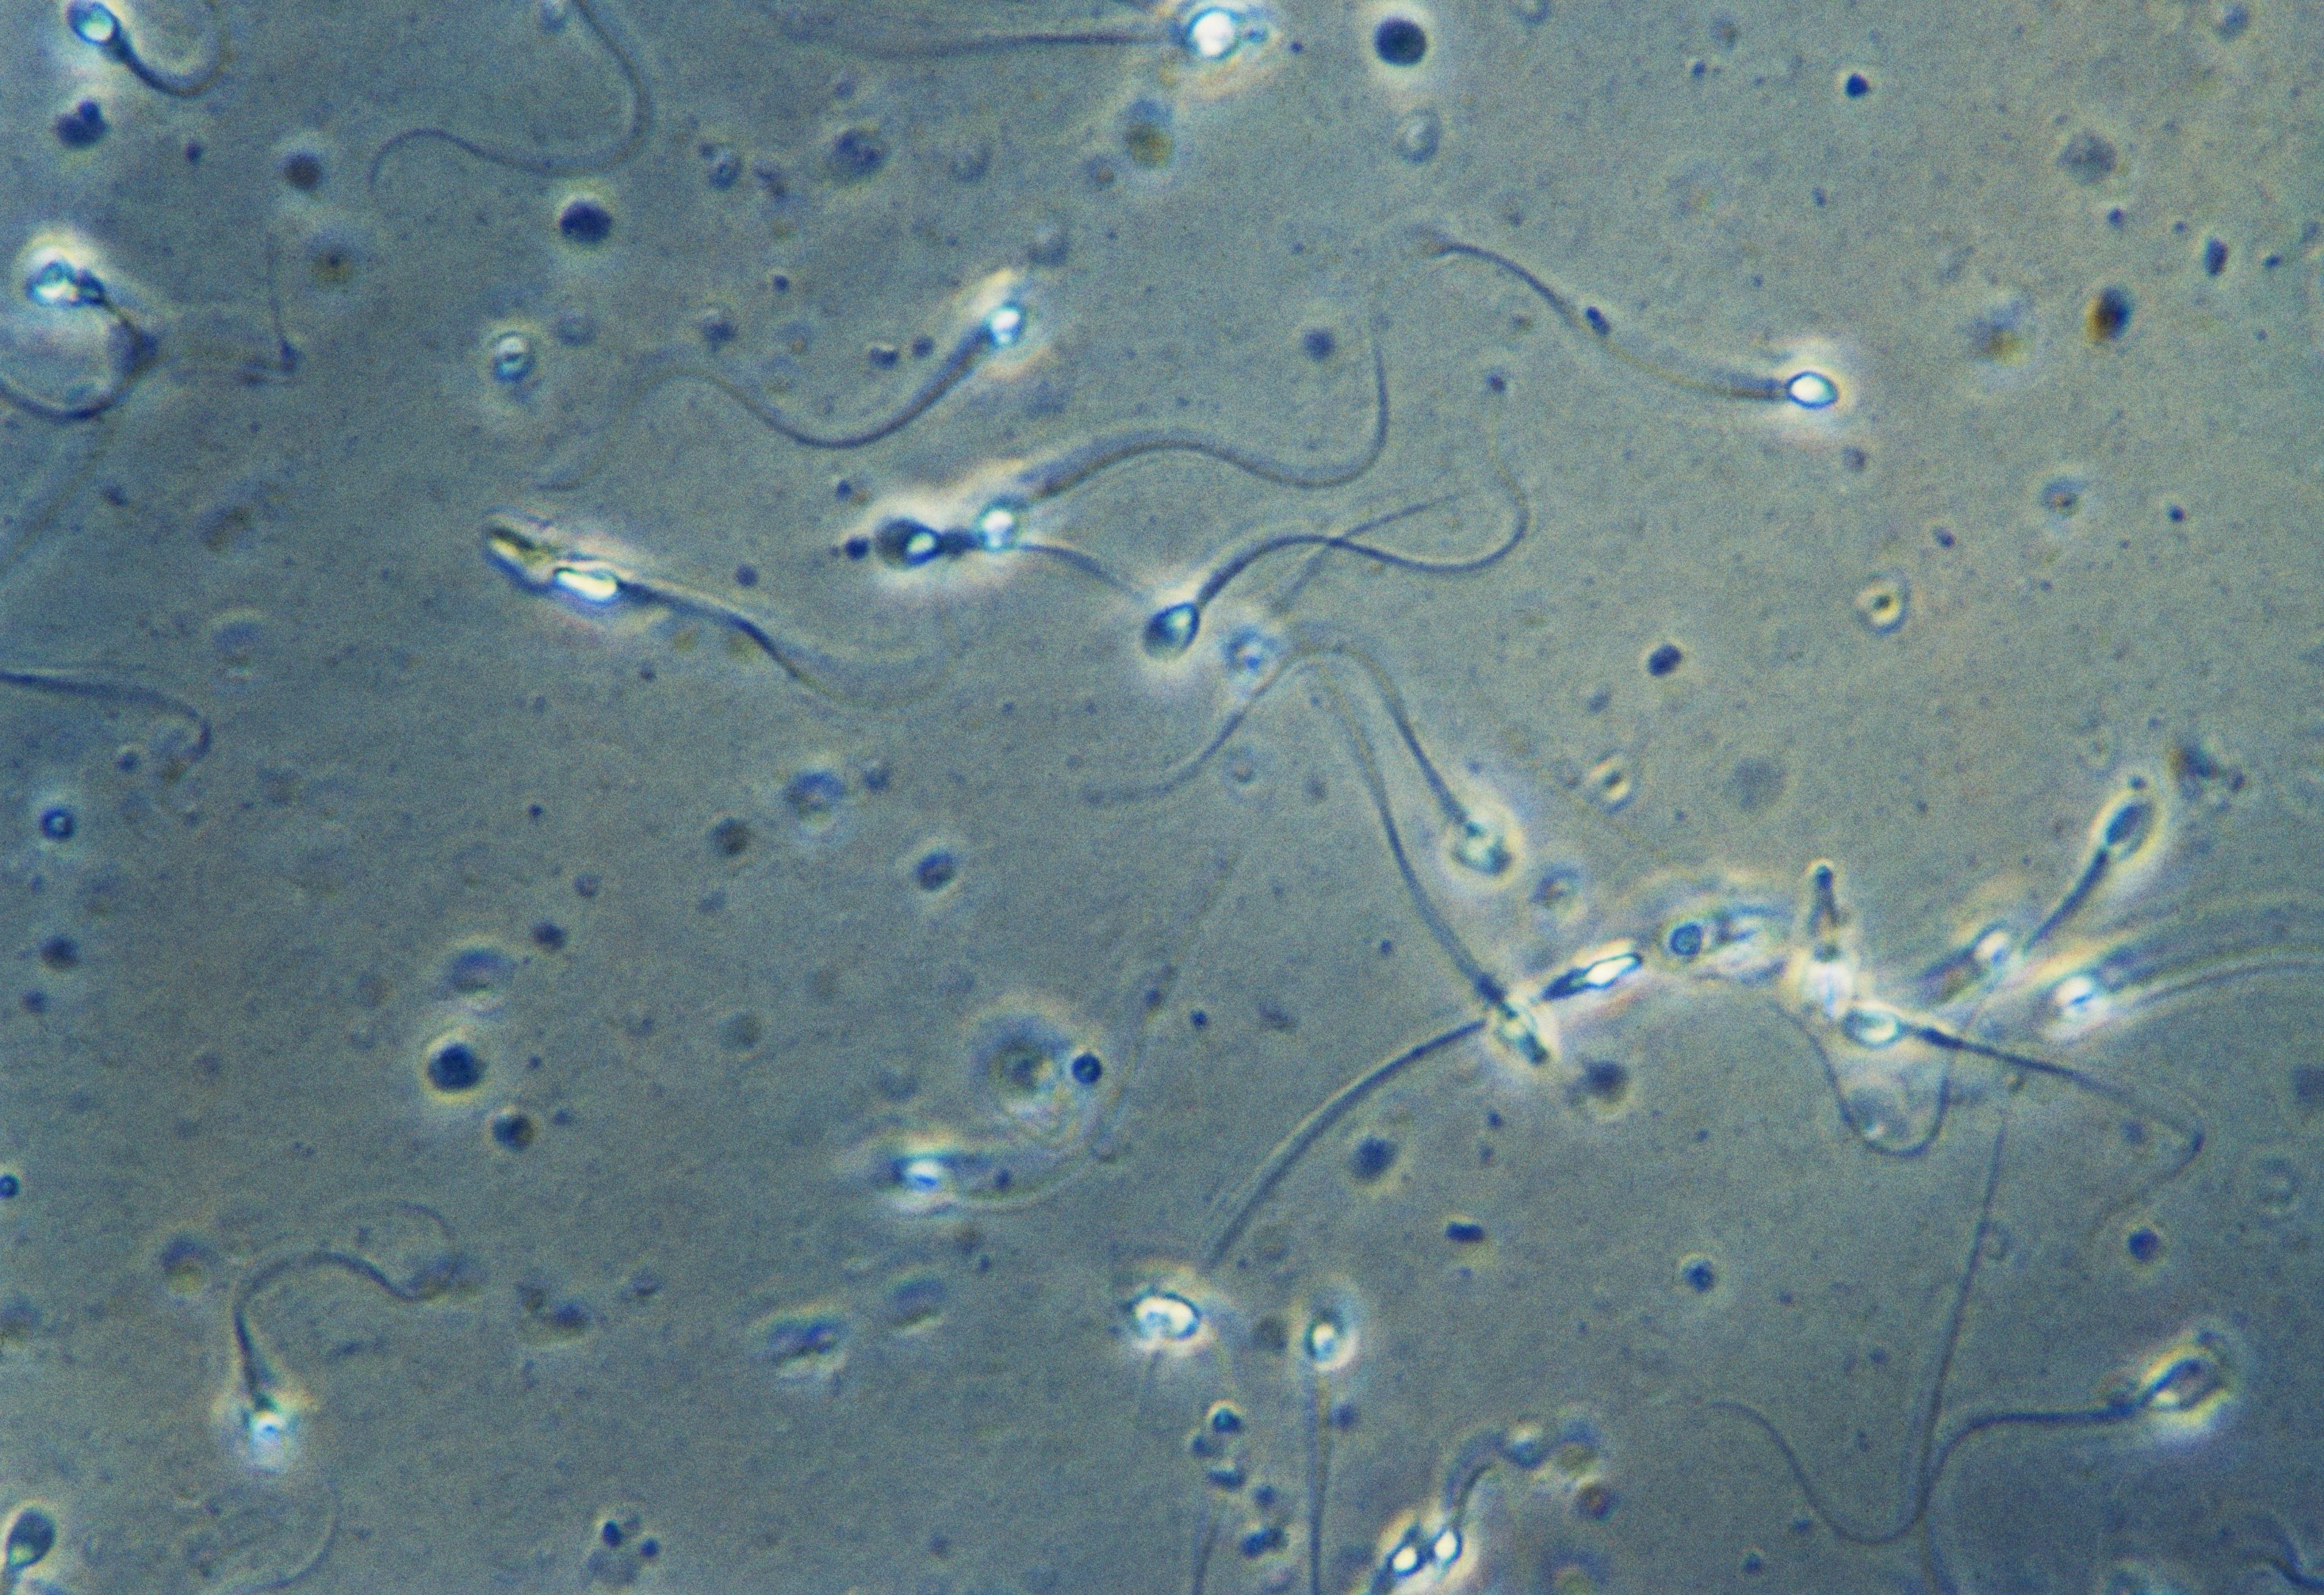 Sperm count and motility